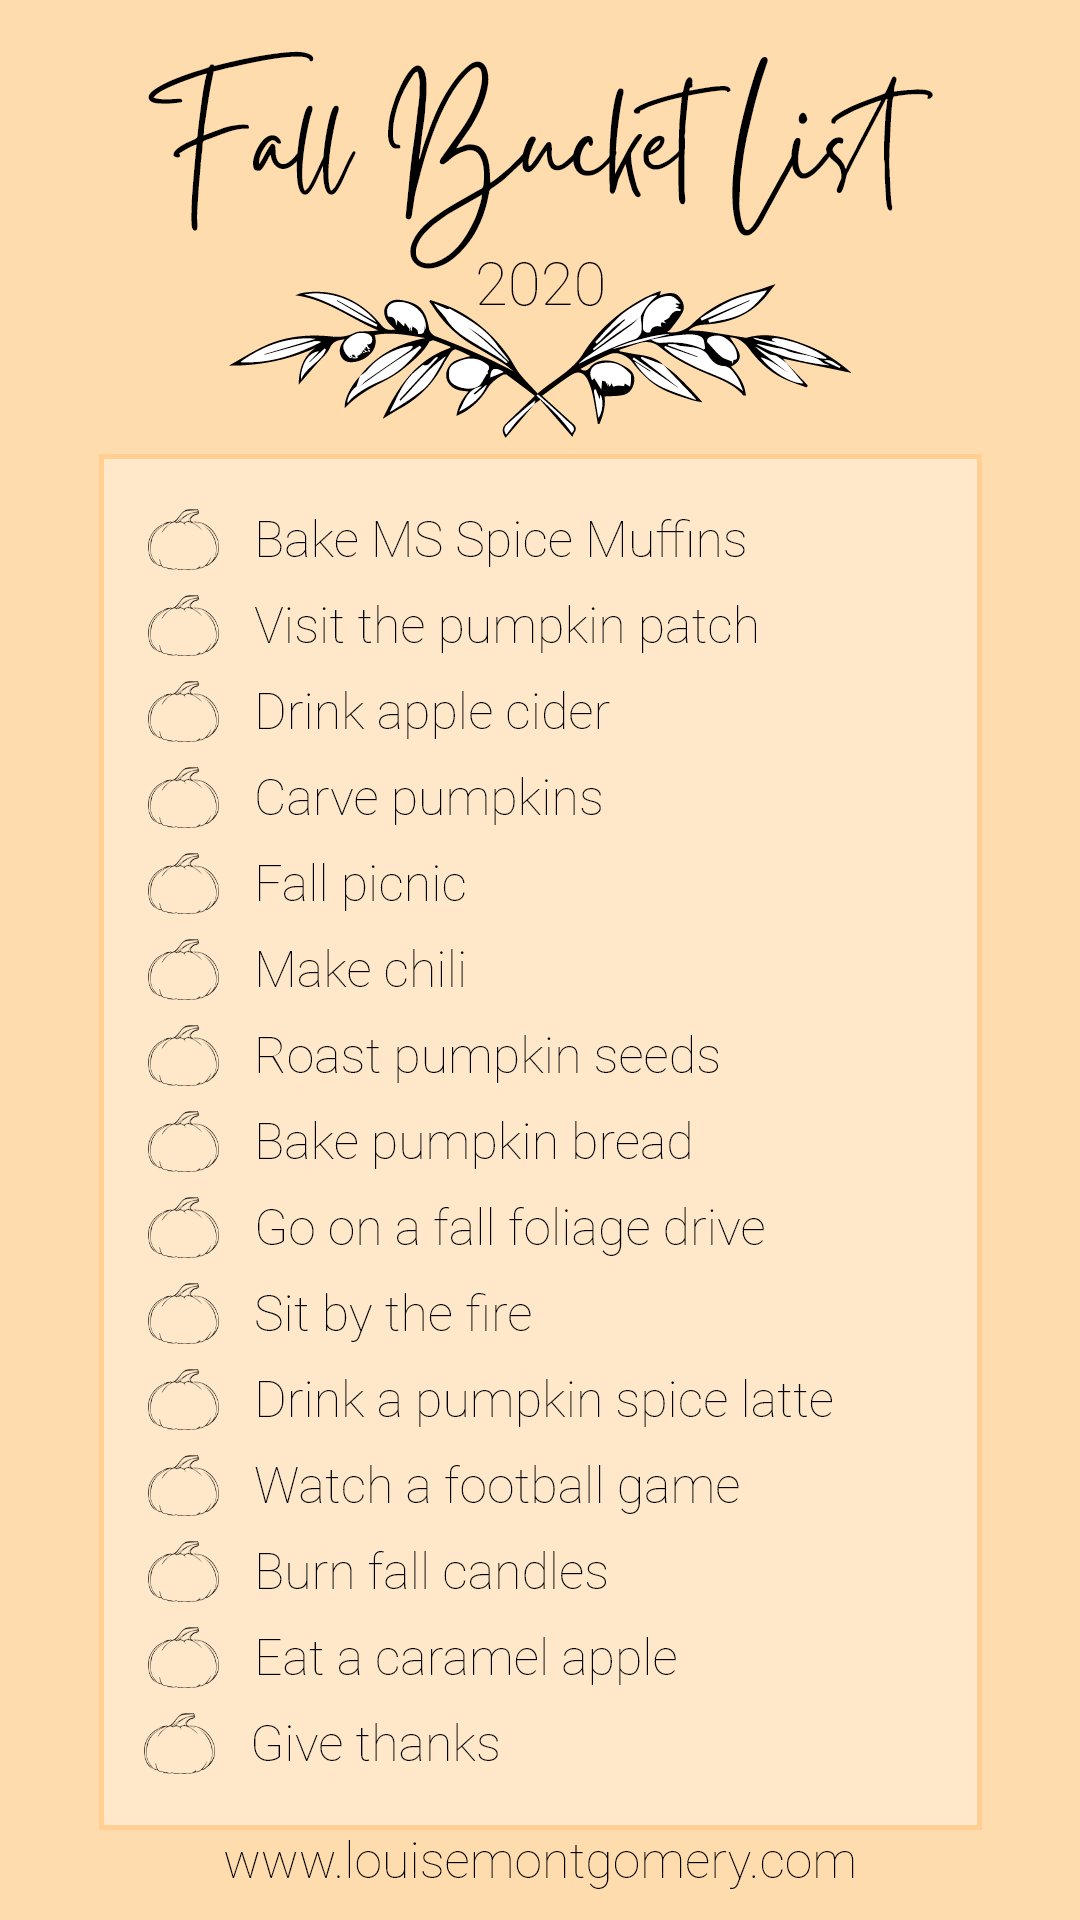 The Ultimate Bucket List for Fall 2020